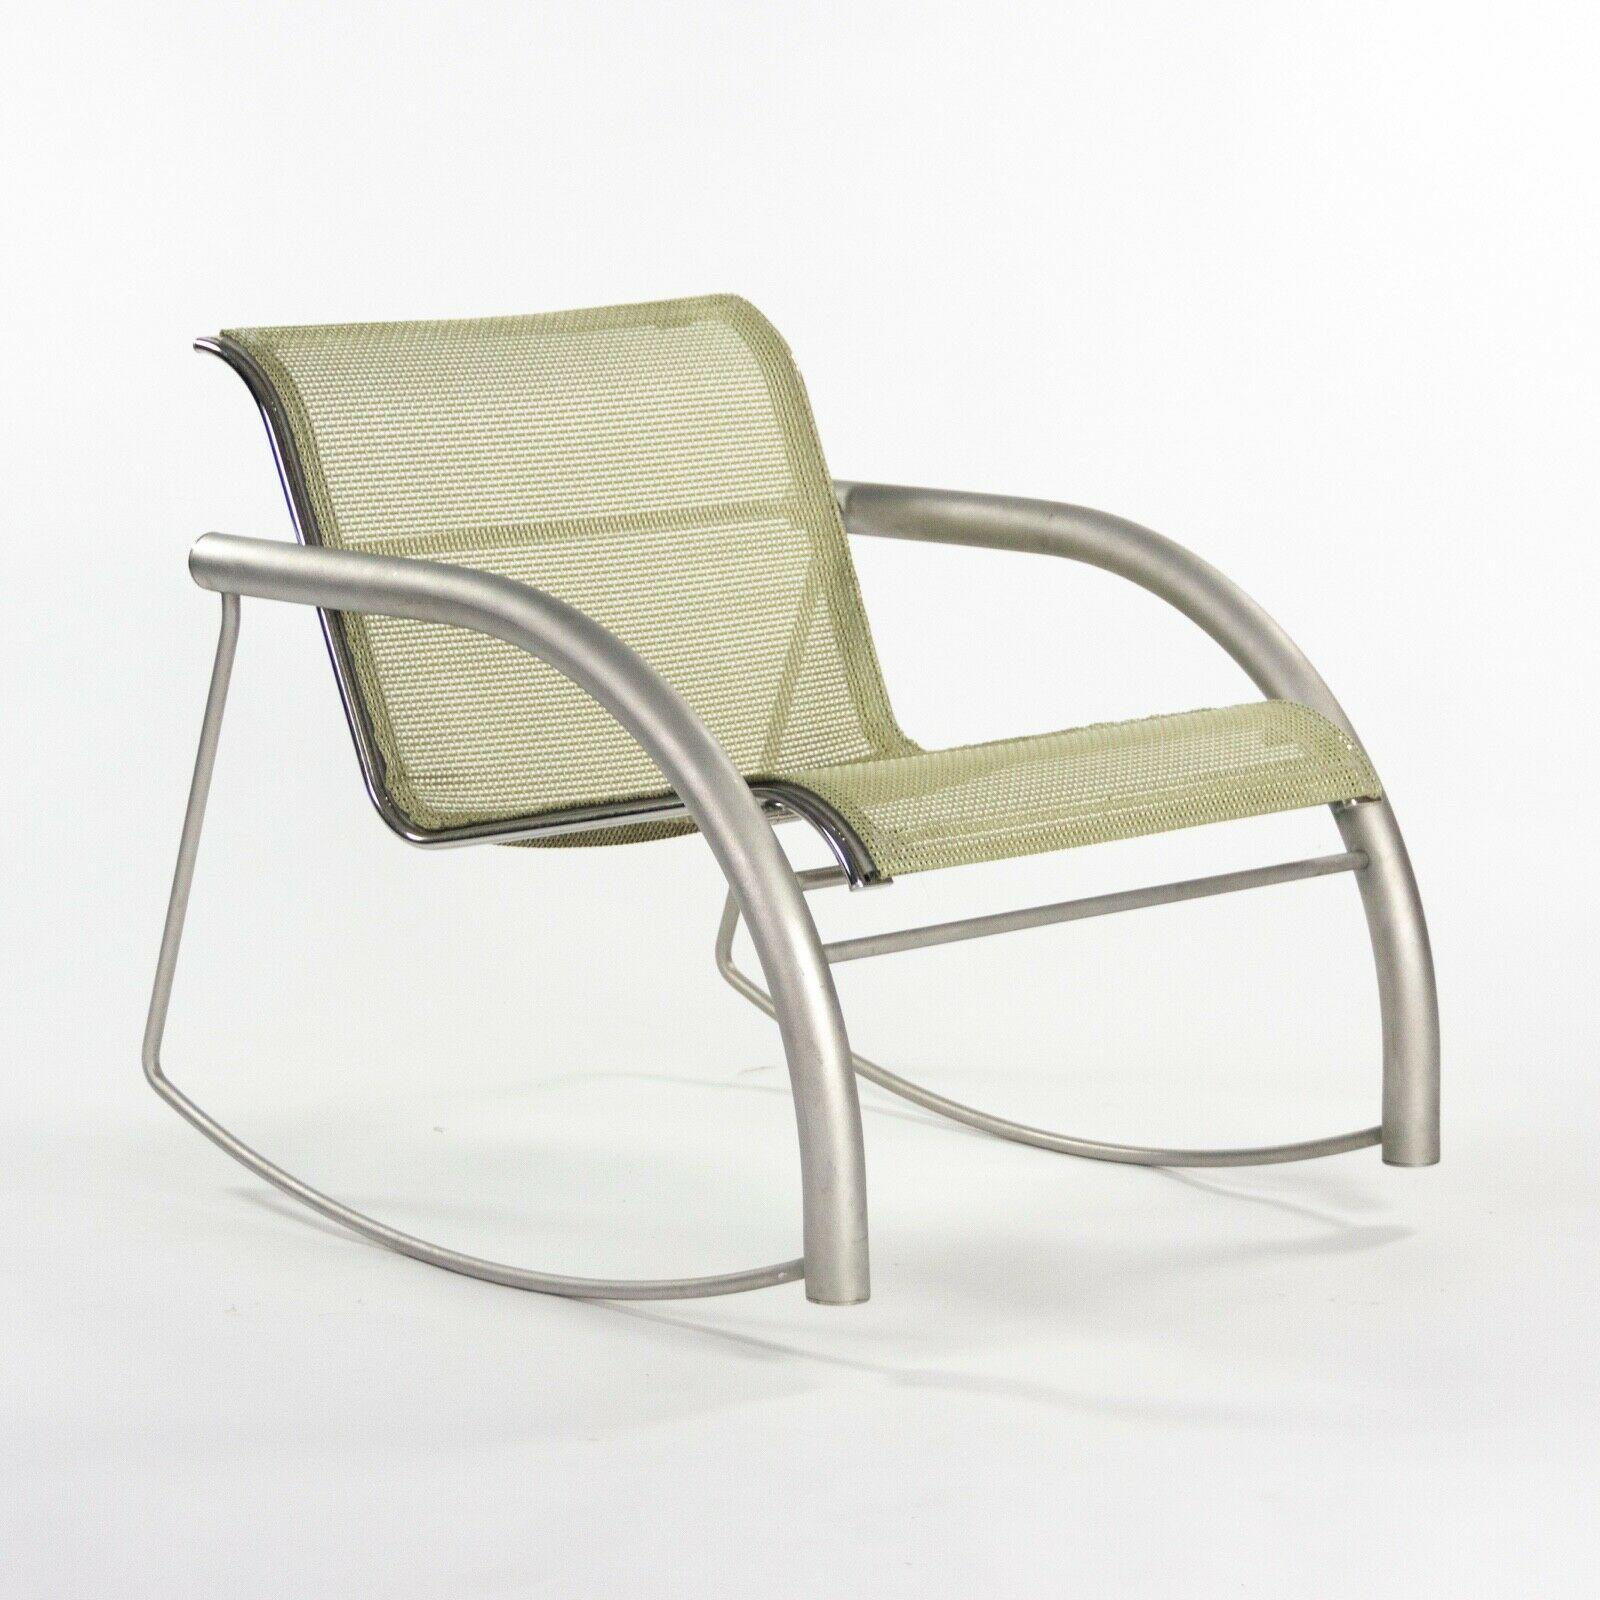 Modern Prototype Richard Schultz 2002 Collection Stainless Steel & Mesh Rocking Chair For Sale